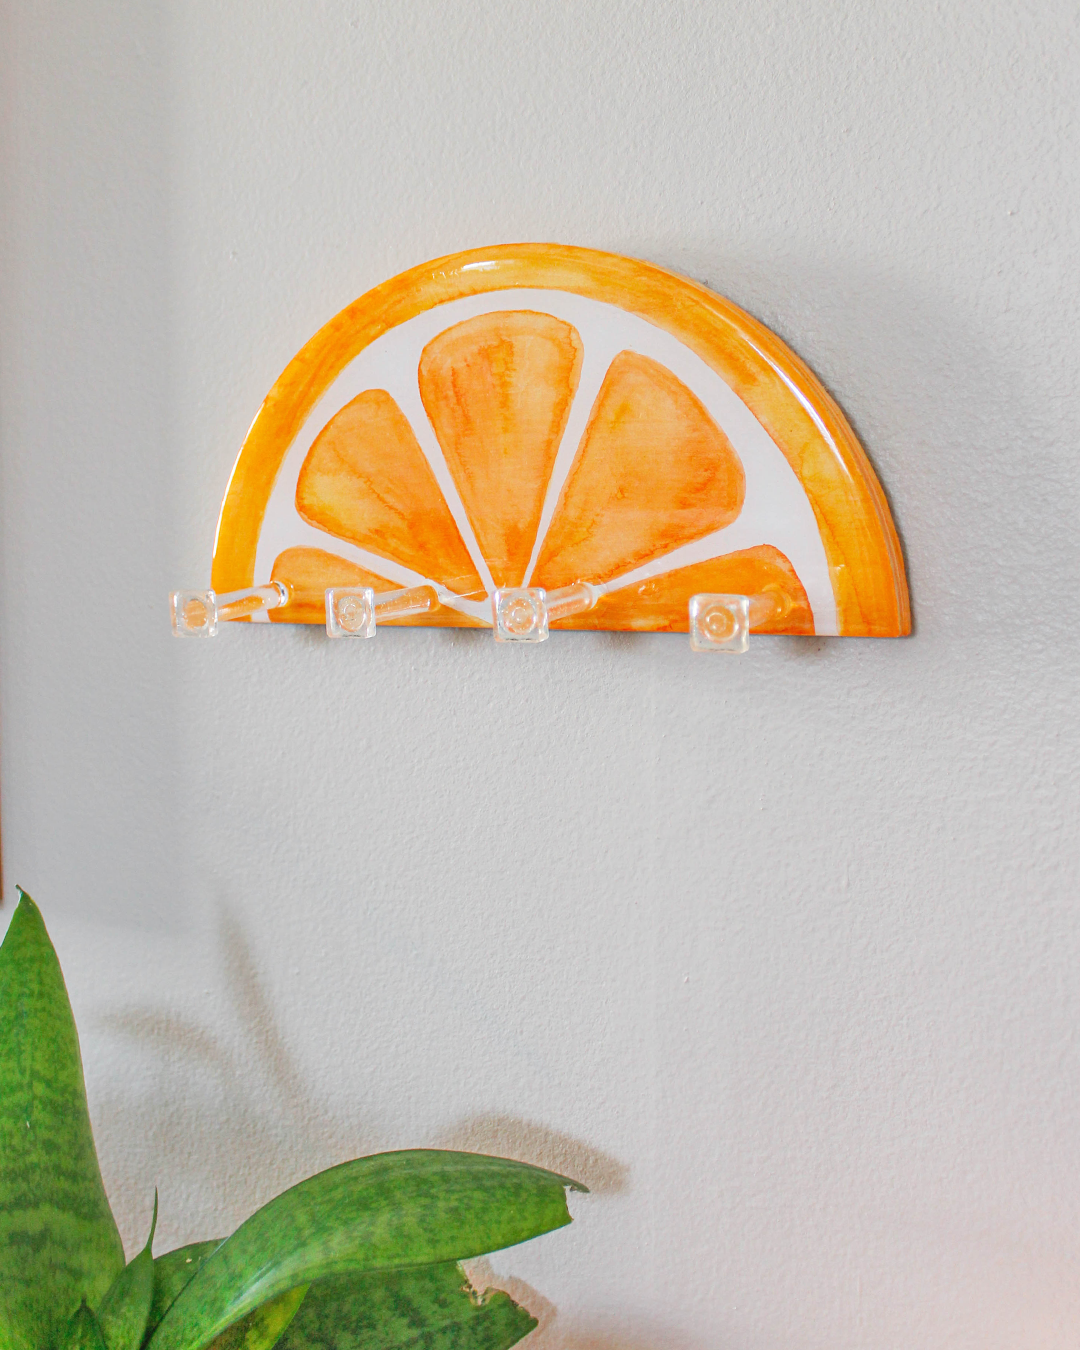 Unique hand-painted key holder inspired by an orange slice, adding a citrus touch to interior design